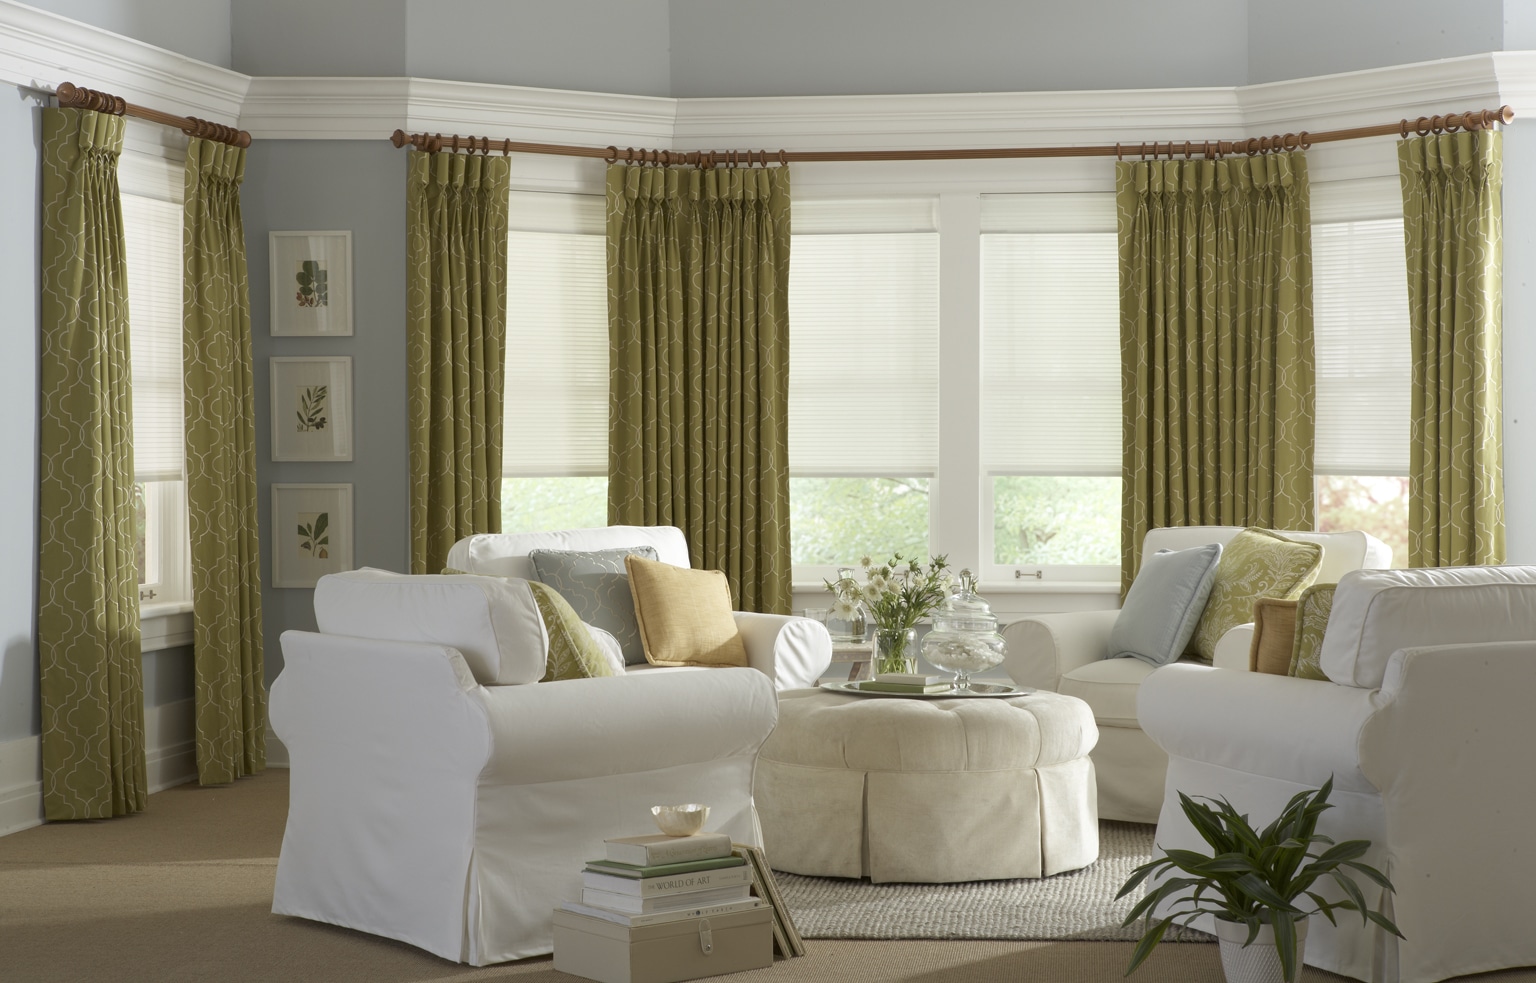 Decorative Drapery for your living room